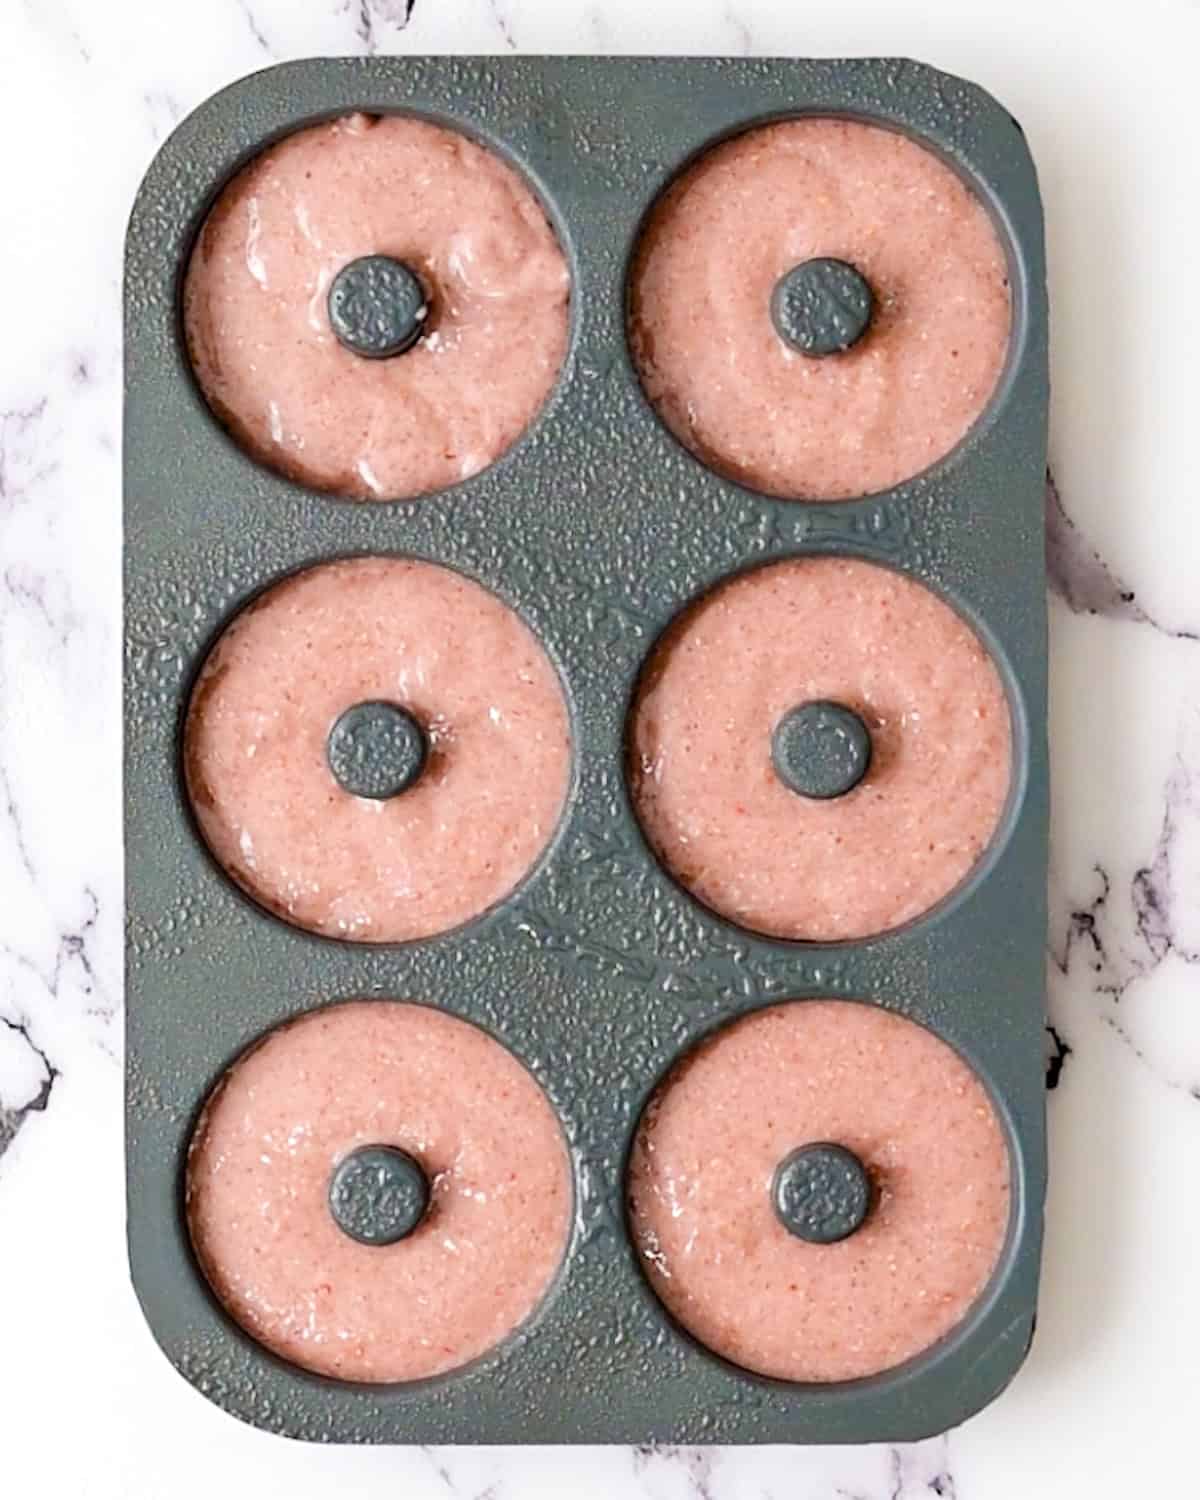 Baked Raspberry Donuts in a donut pan before baking